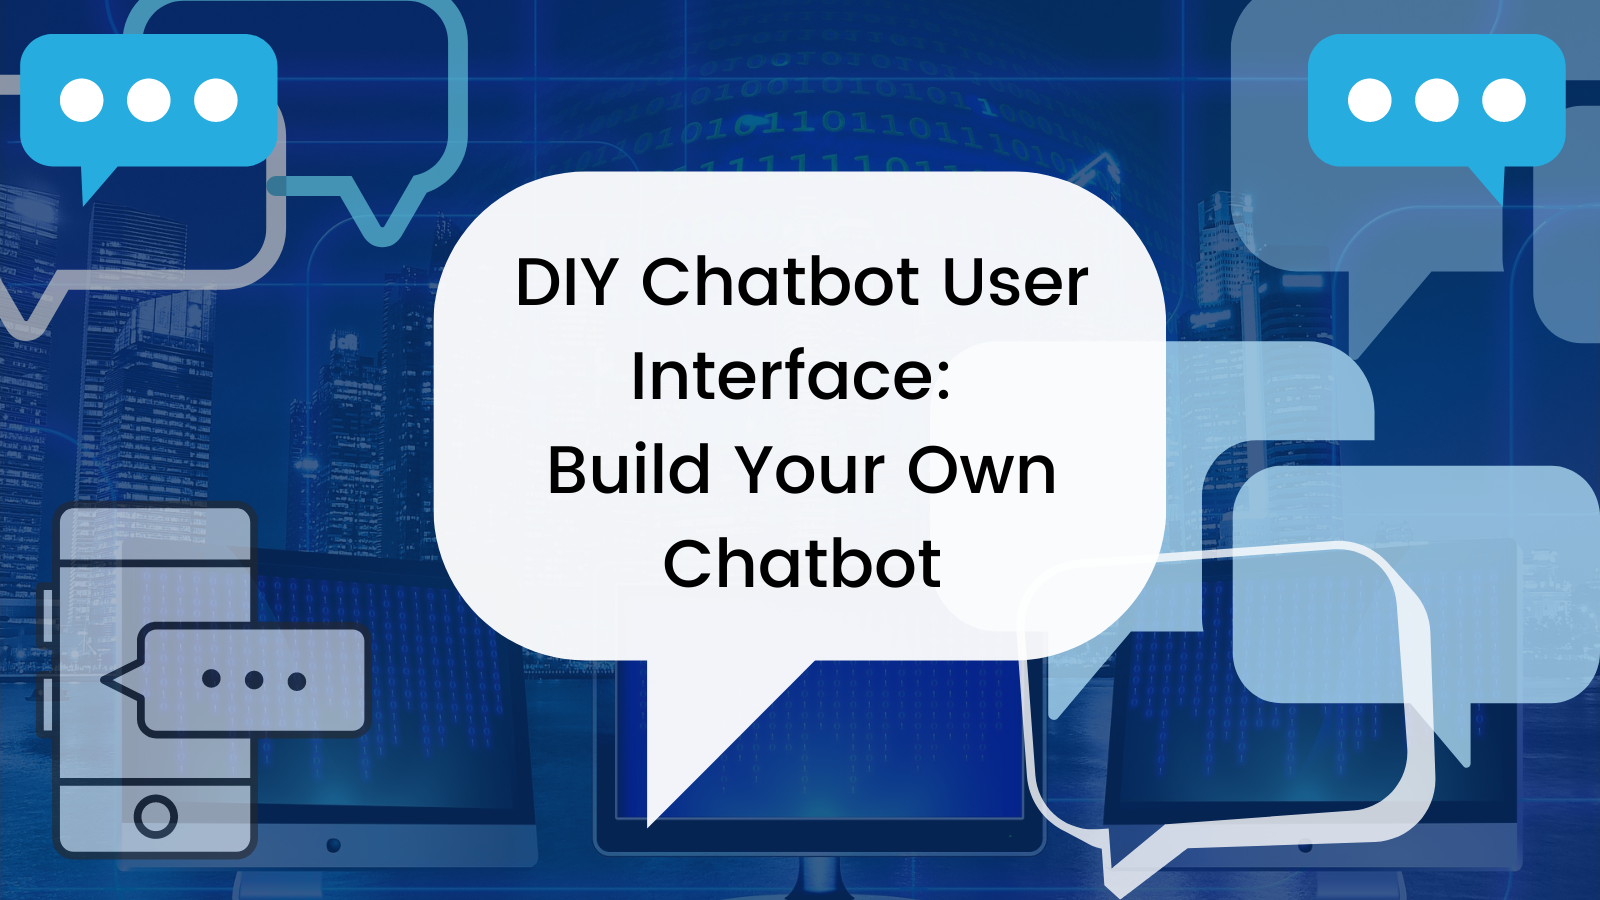 DIY Chatbot User Interface: Build Your Own Chatbot